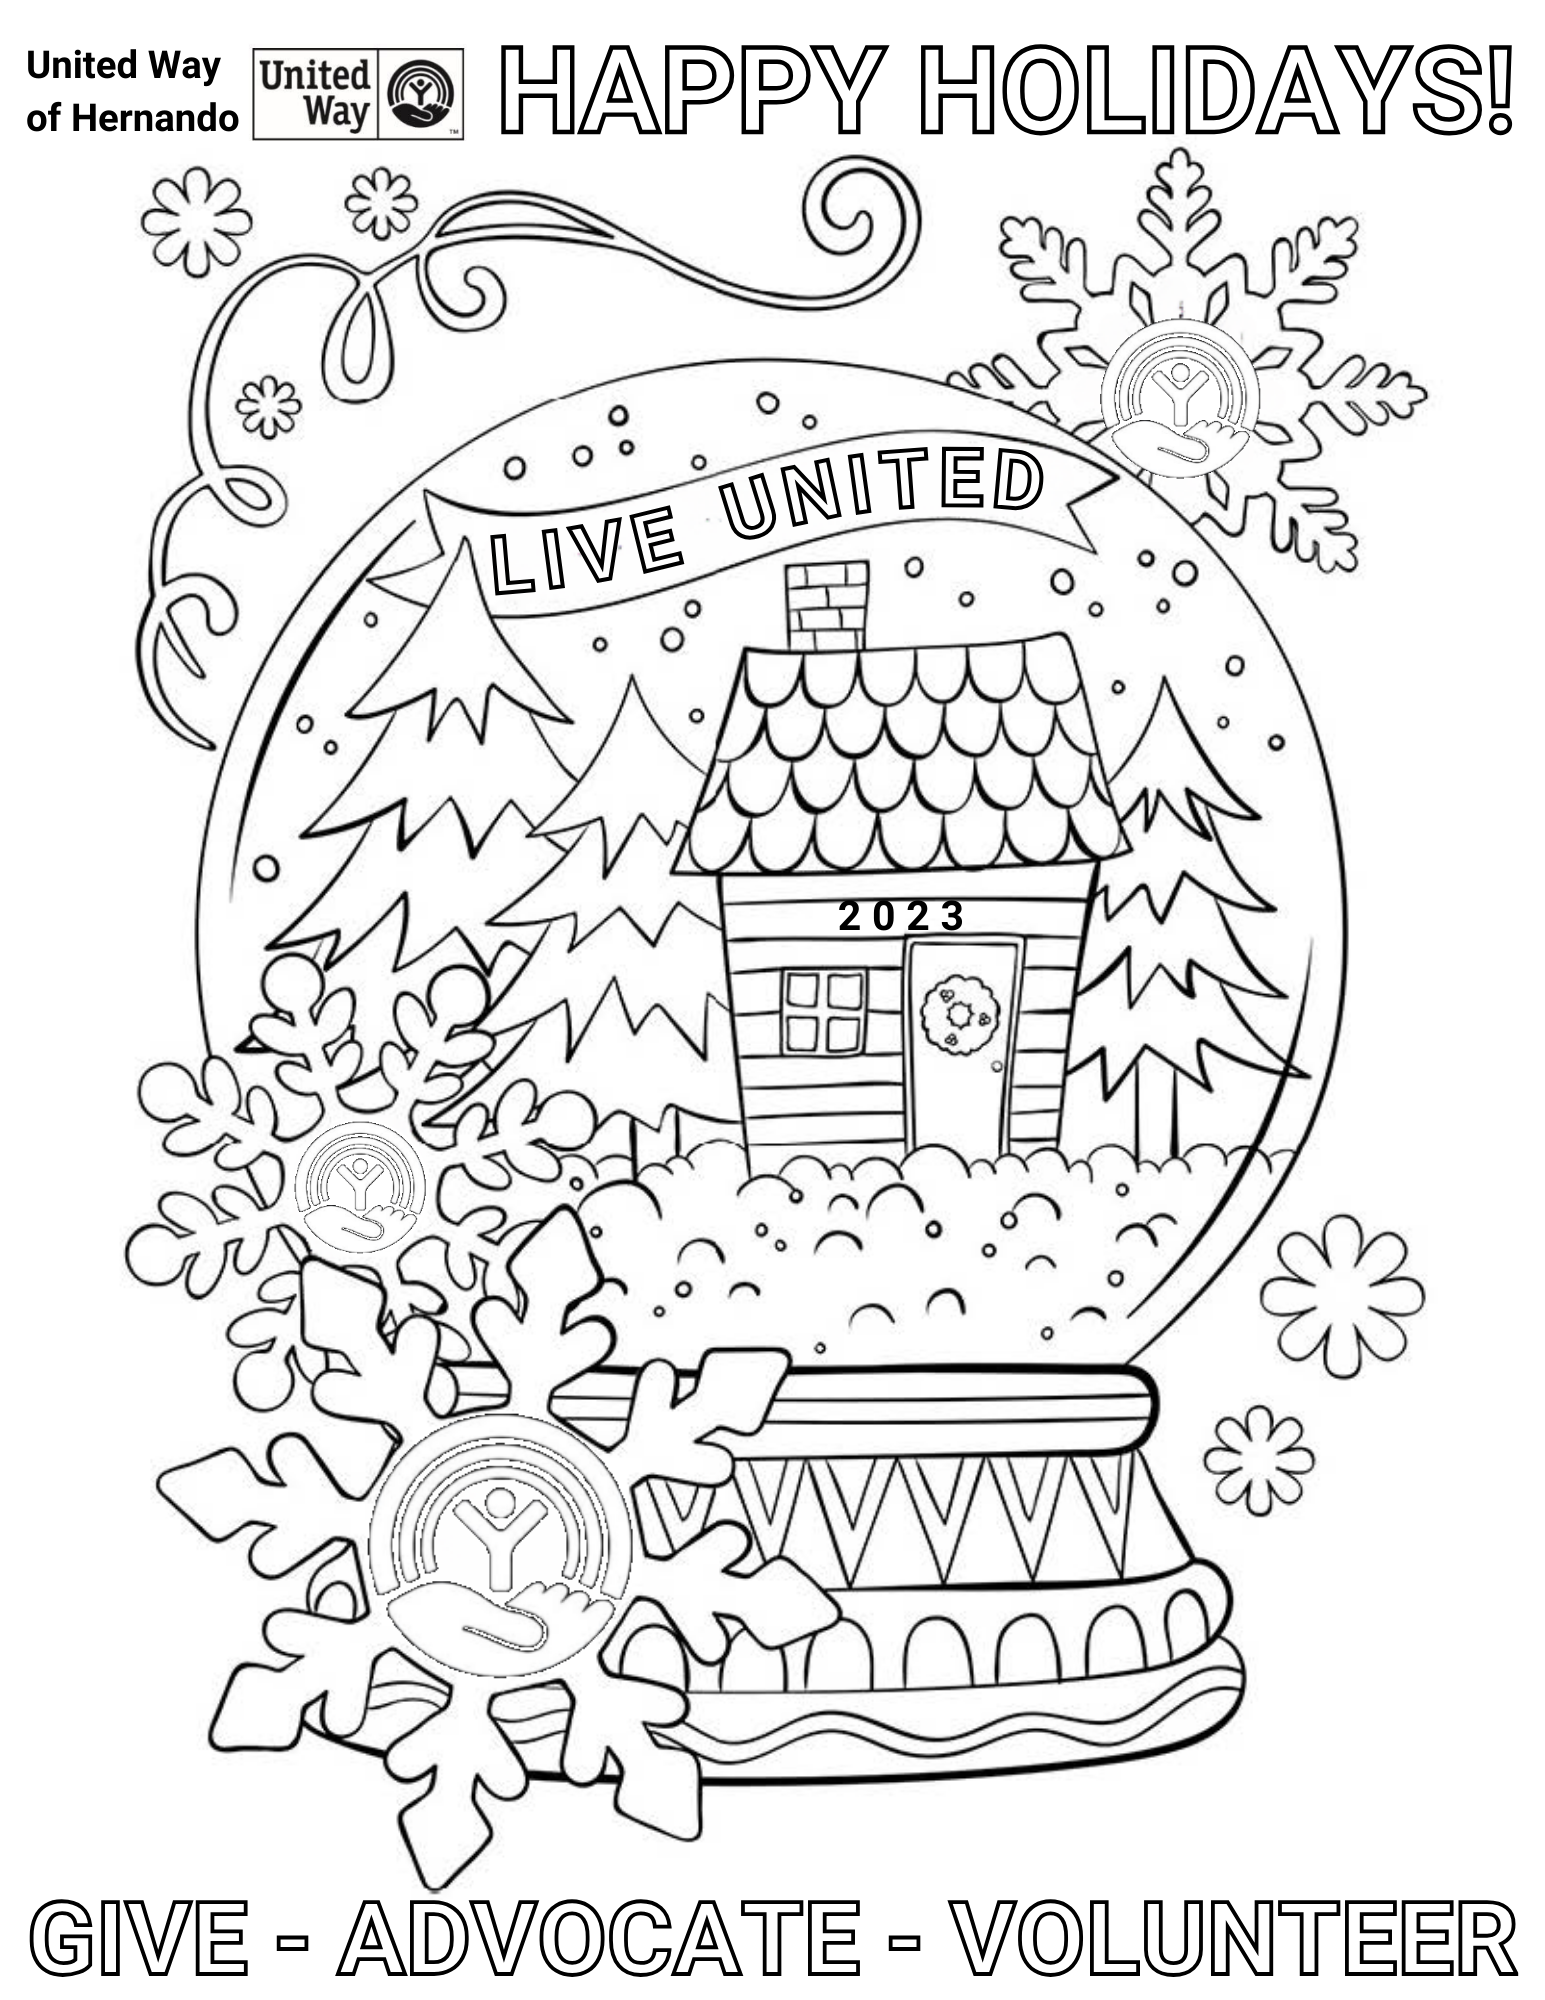 2023 Holiday Card Coloring Contest 